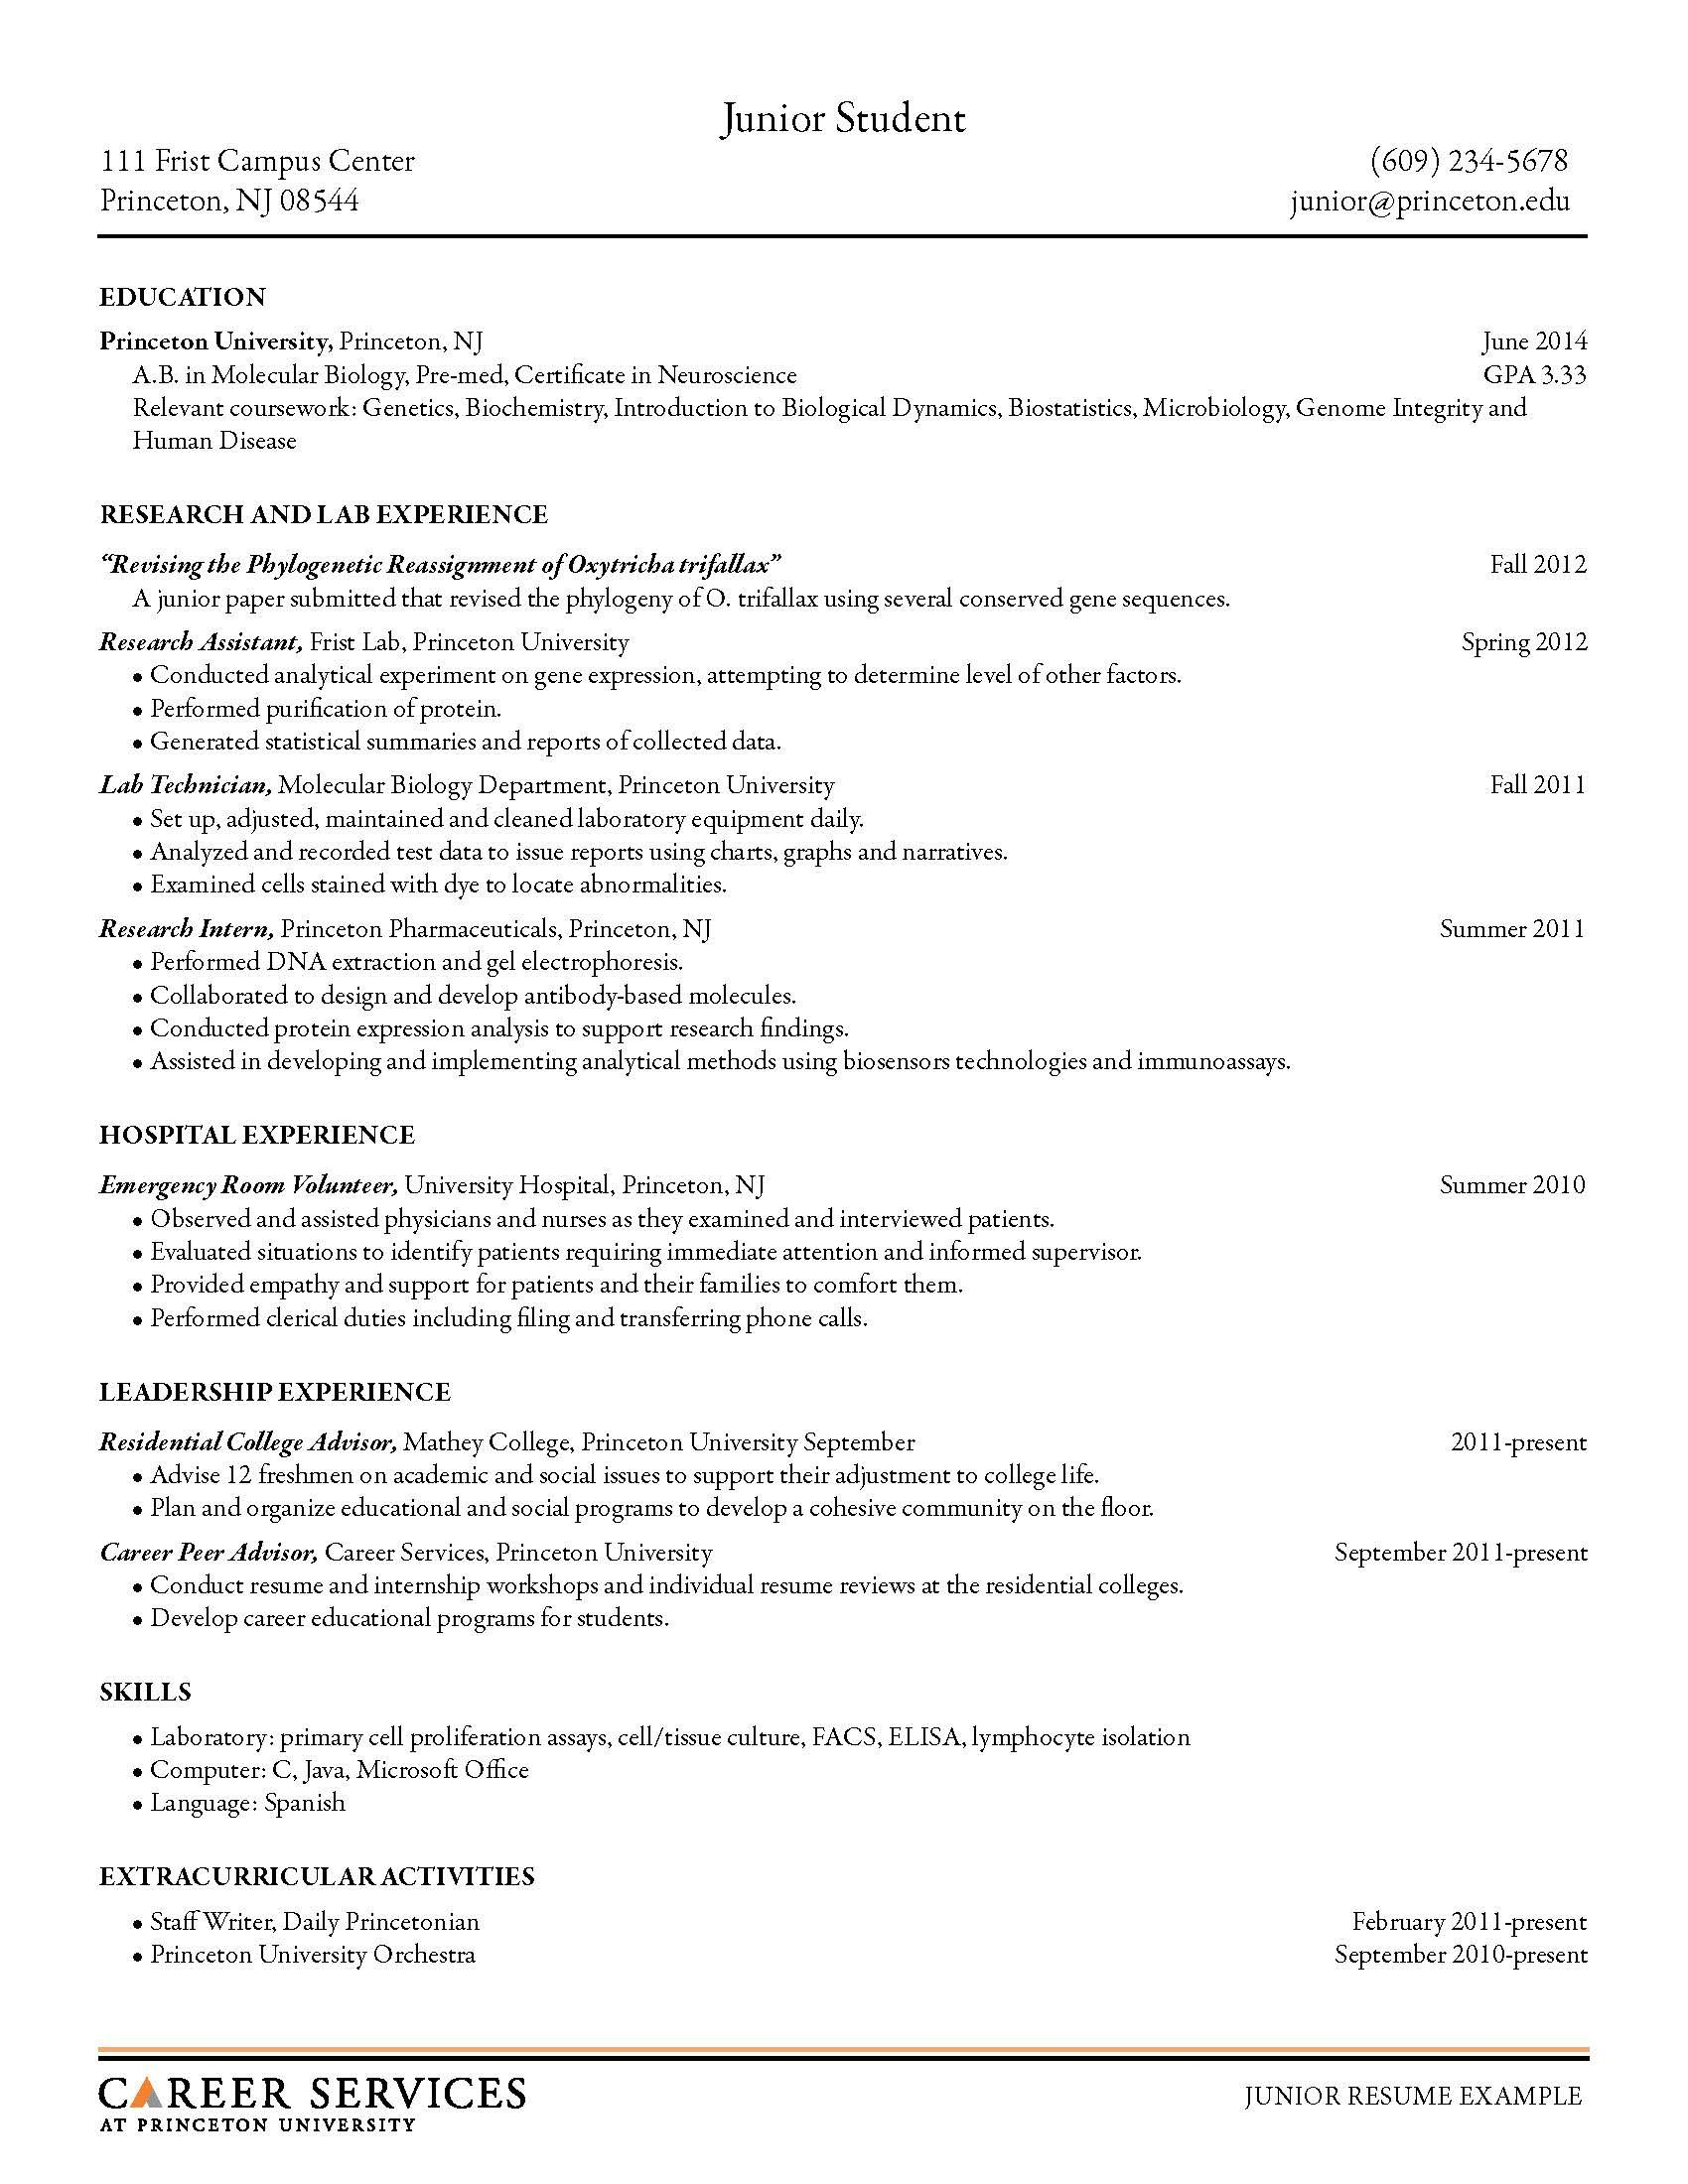 Sample Resumes Junior Student Career Services within measurements 1700 X 2200